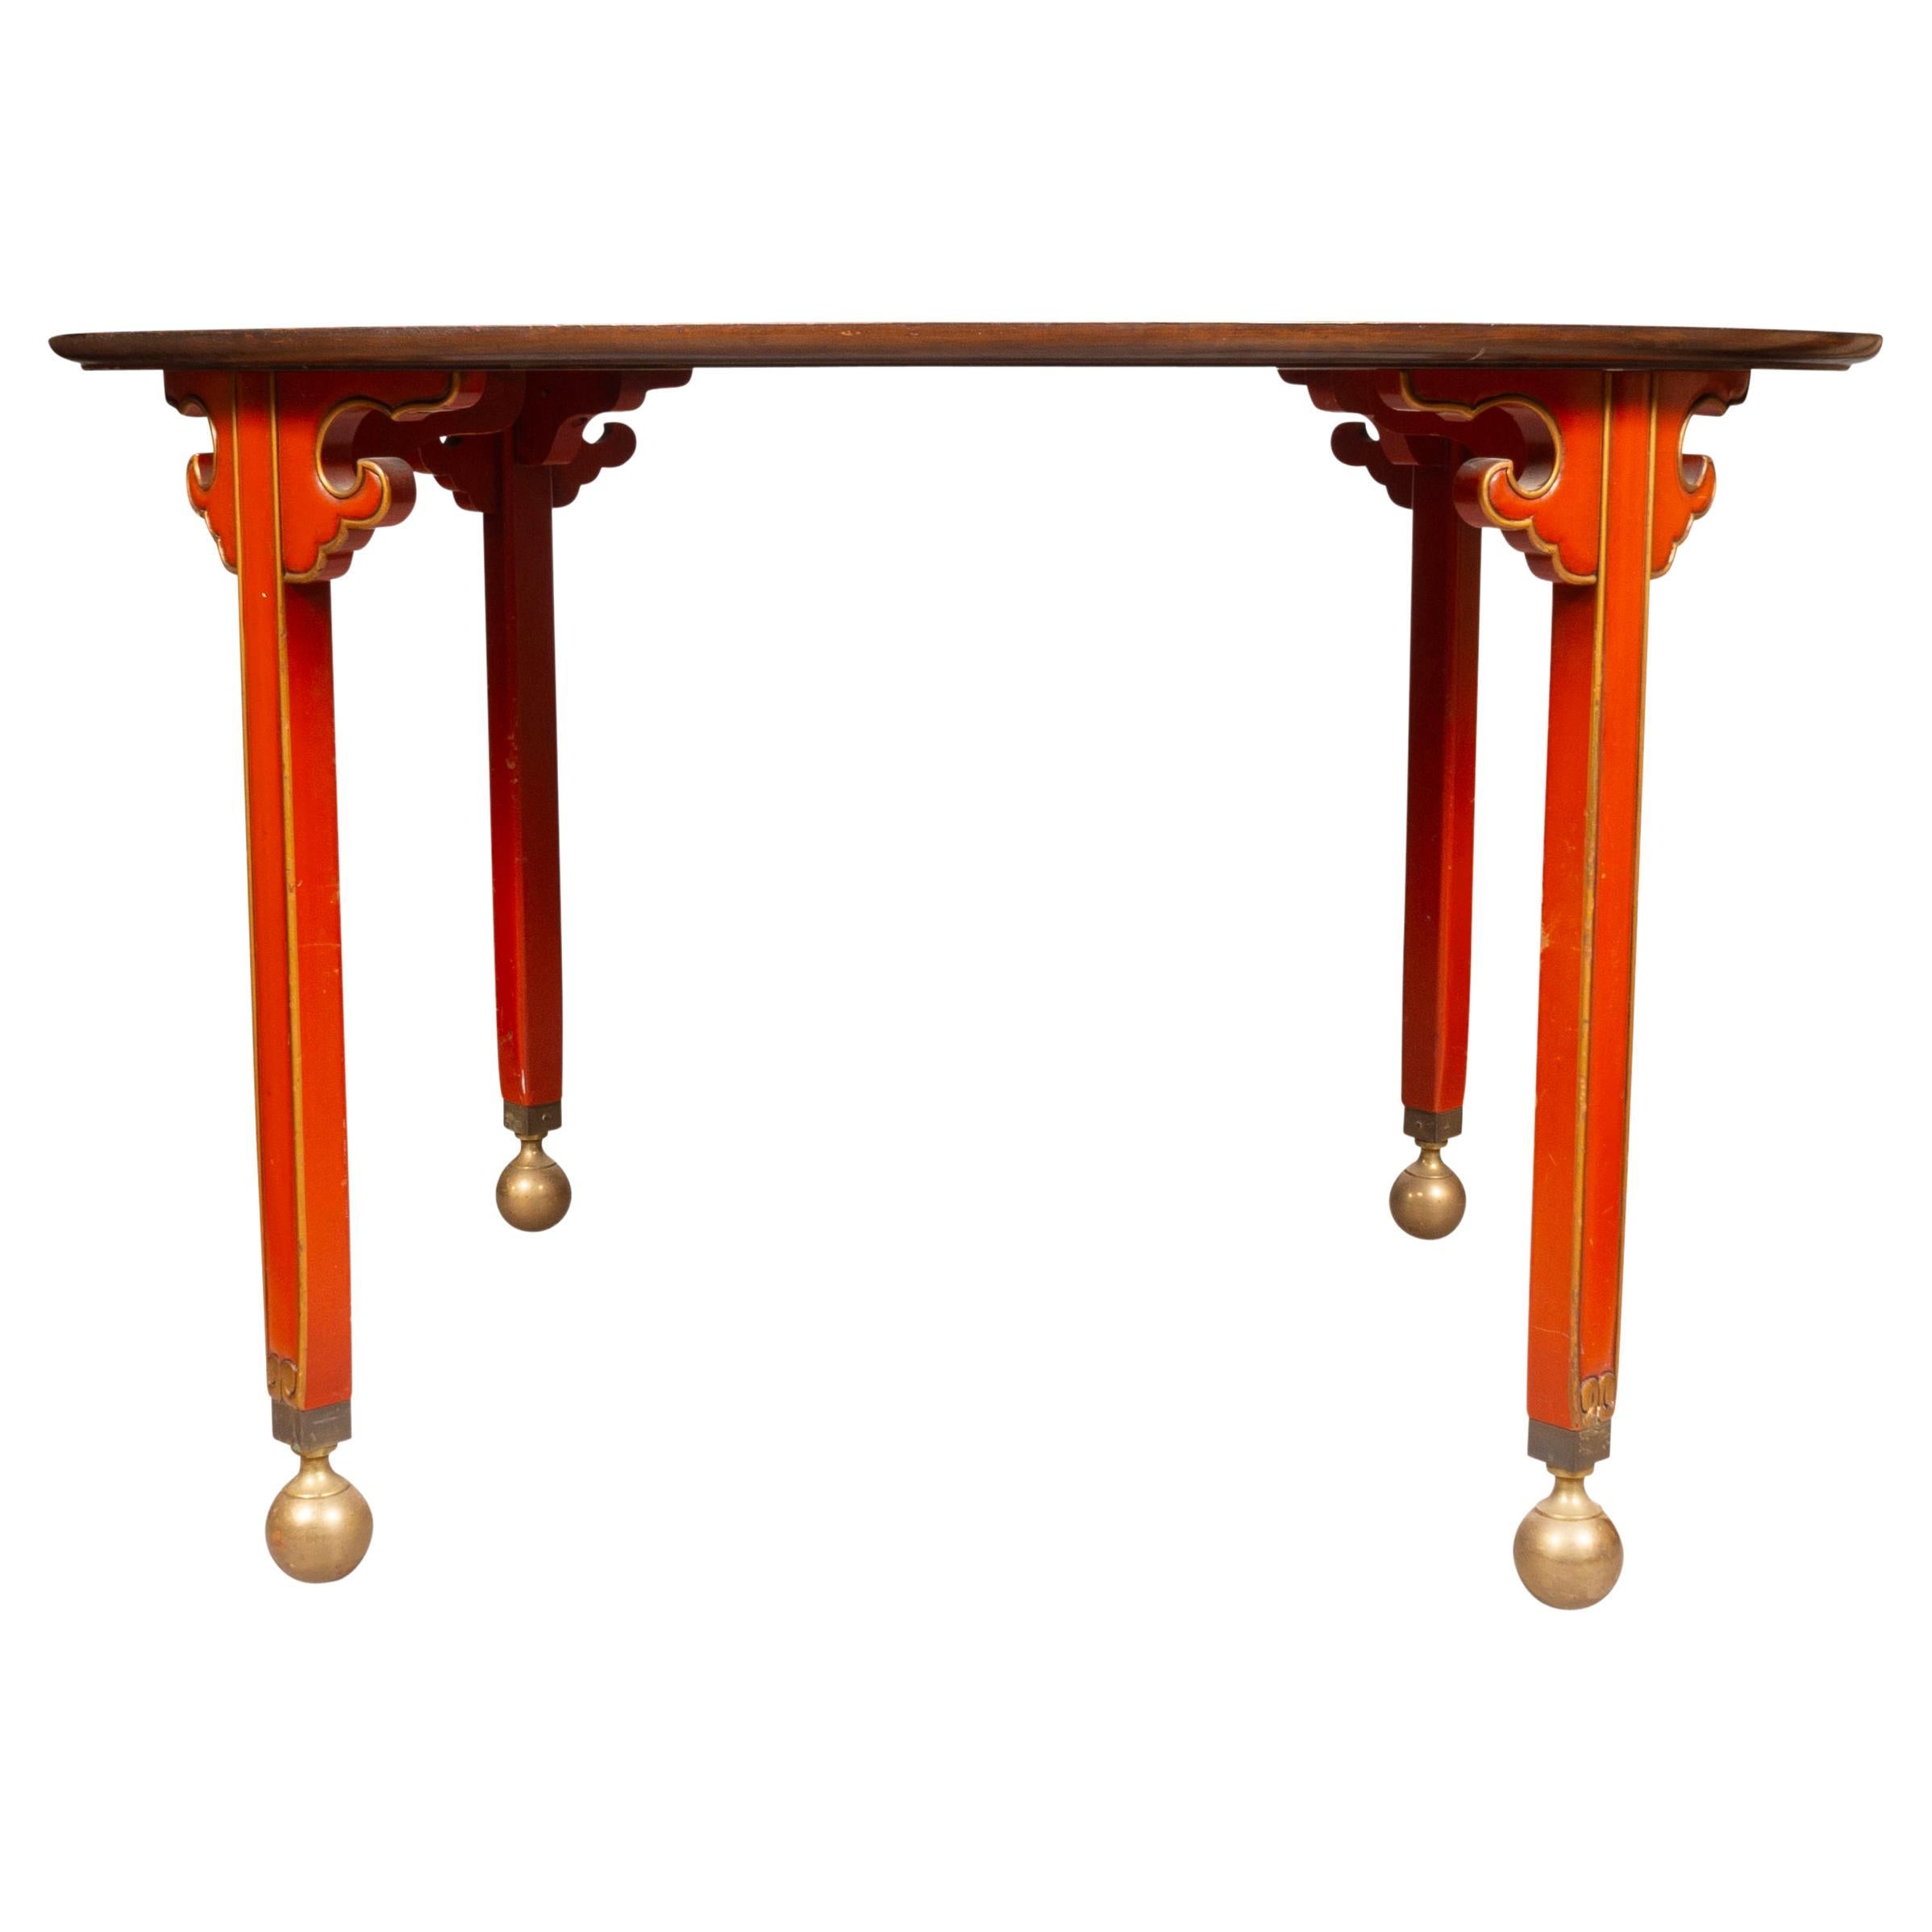 Circular mahogany top over a Chinese style red lacquer and gilt frieze. Square section legs and brass ball feet.